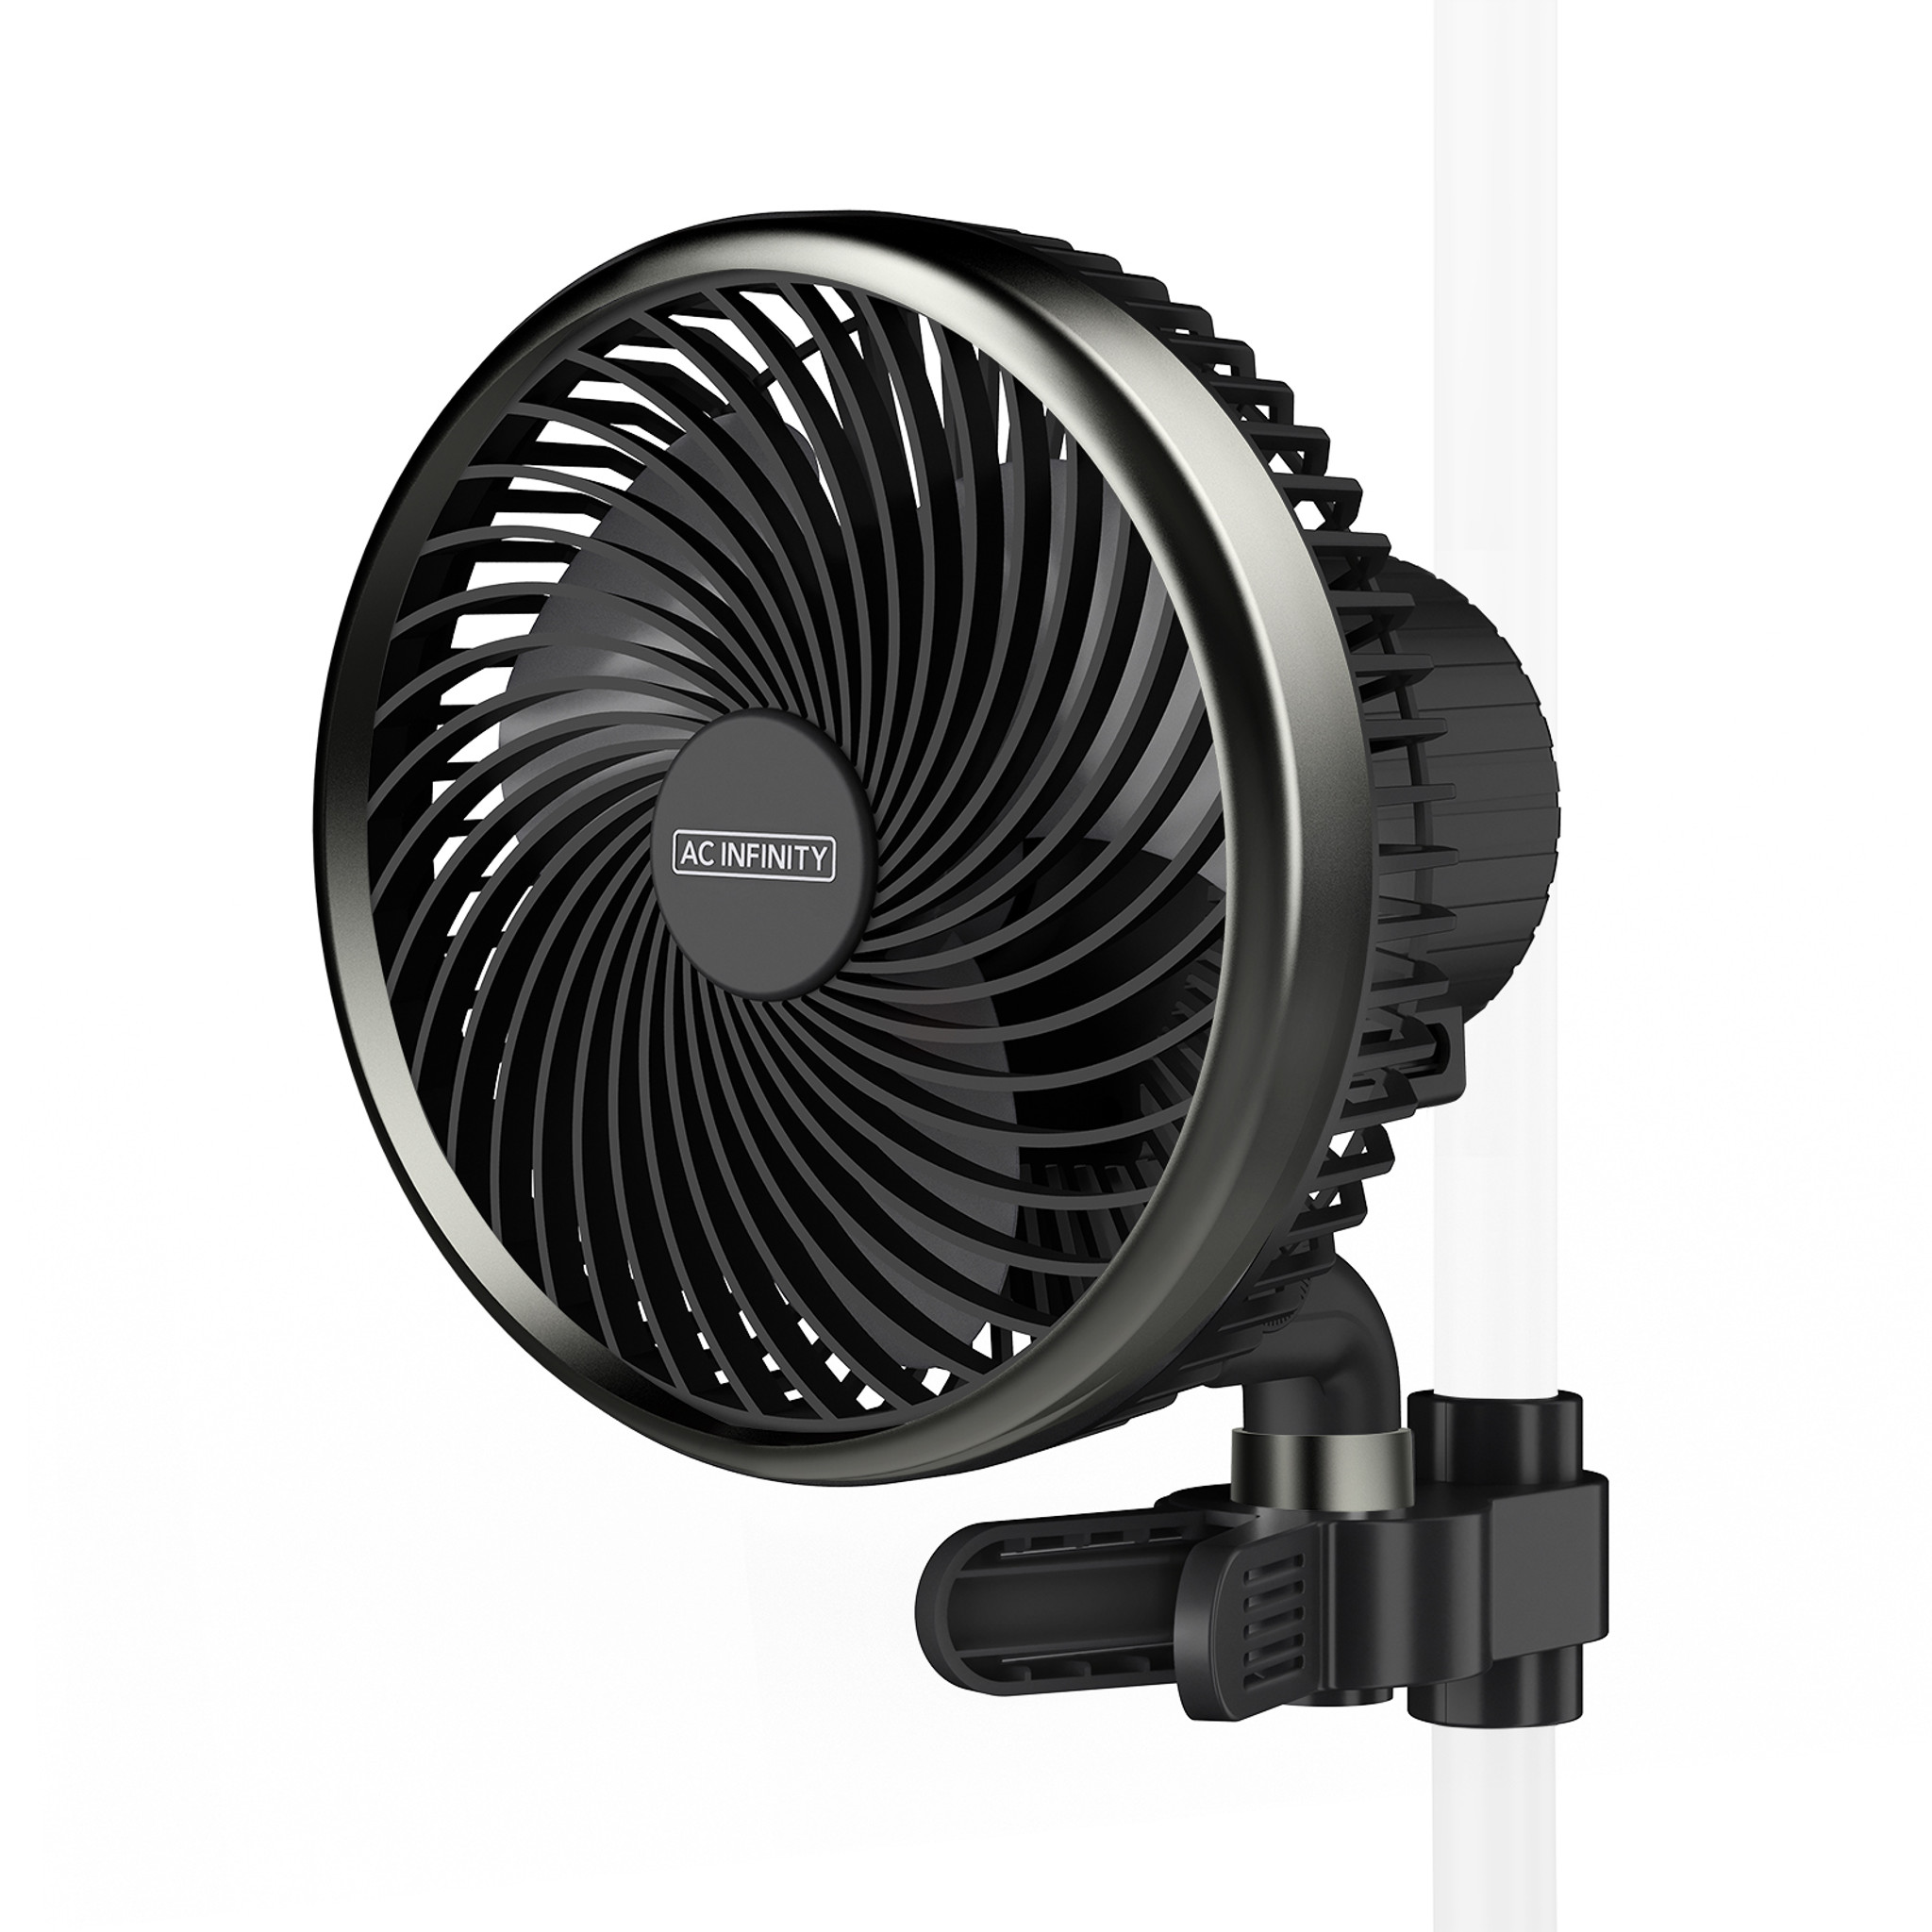 Window Duct Kit, Adjustable Vent Port for Inline Fans - AC Infinity